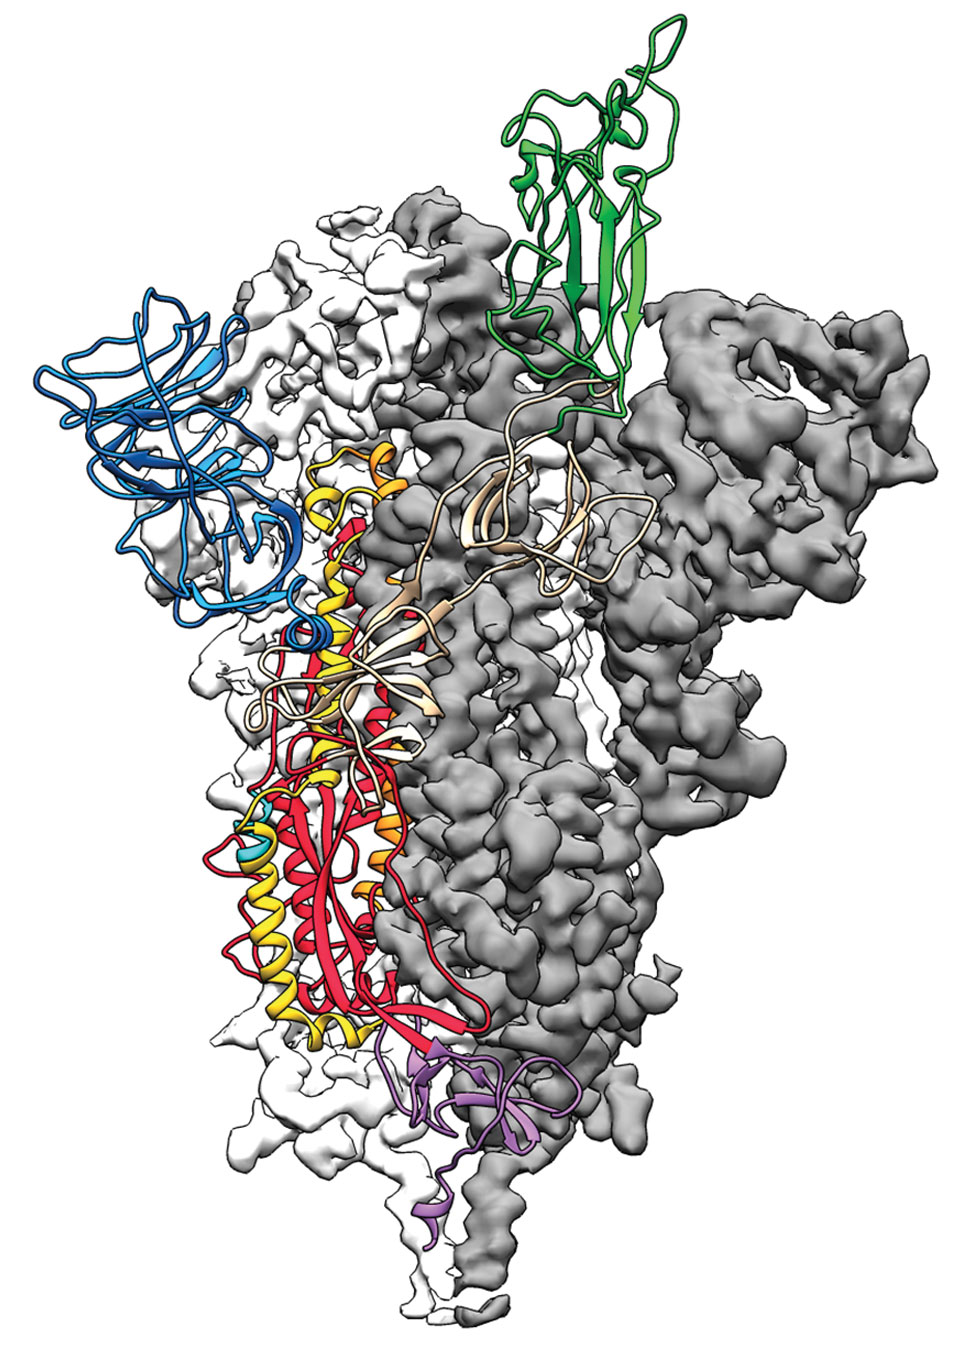 Cryo-electron microscopy structure of the SARS-CoV-2 spike protein.